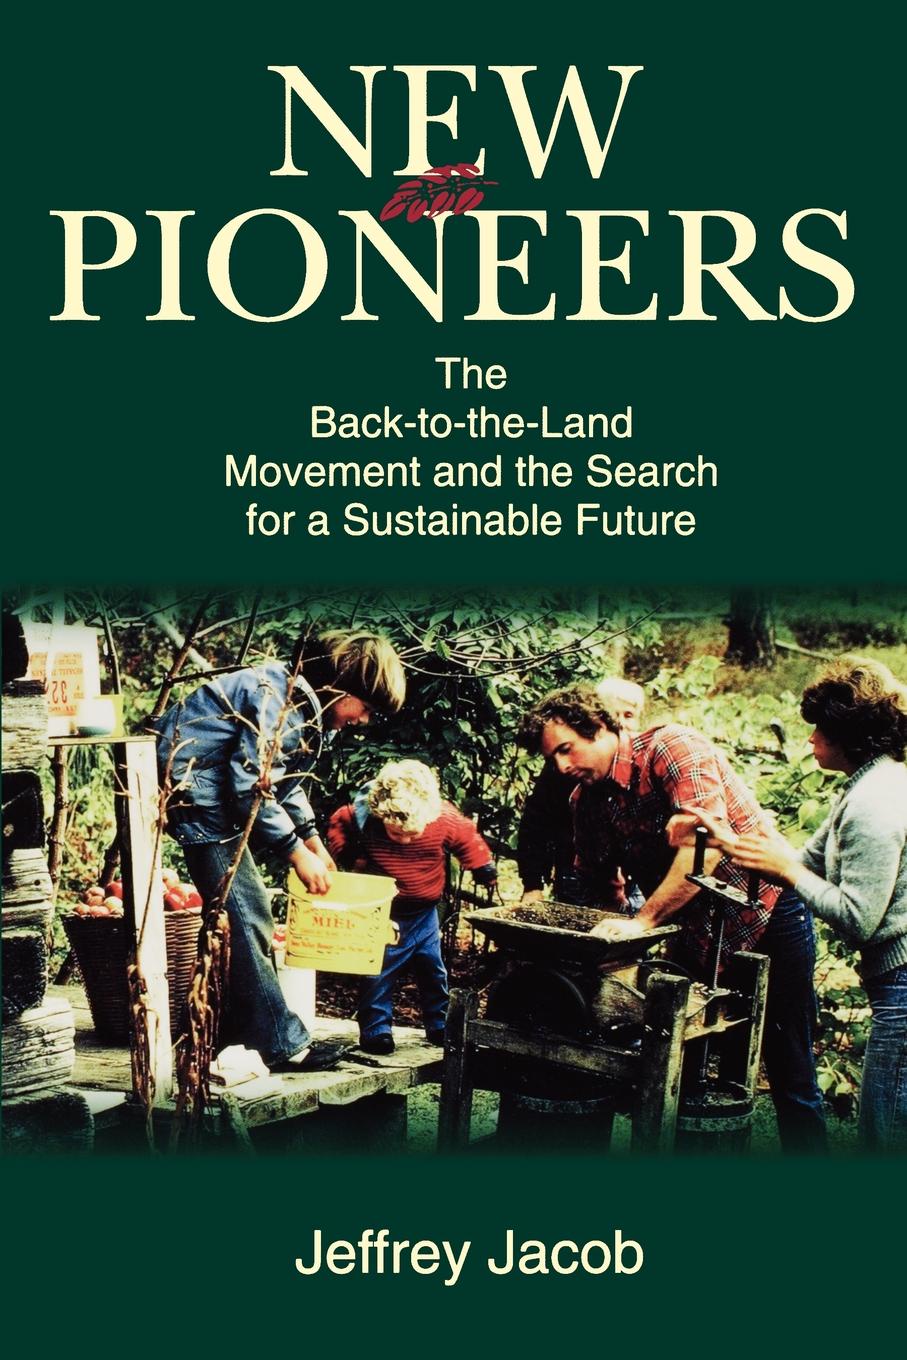 New Pioneers. The Back-To-The-Land Movement and the Search for a Sustainable Future